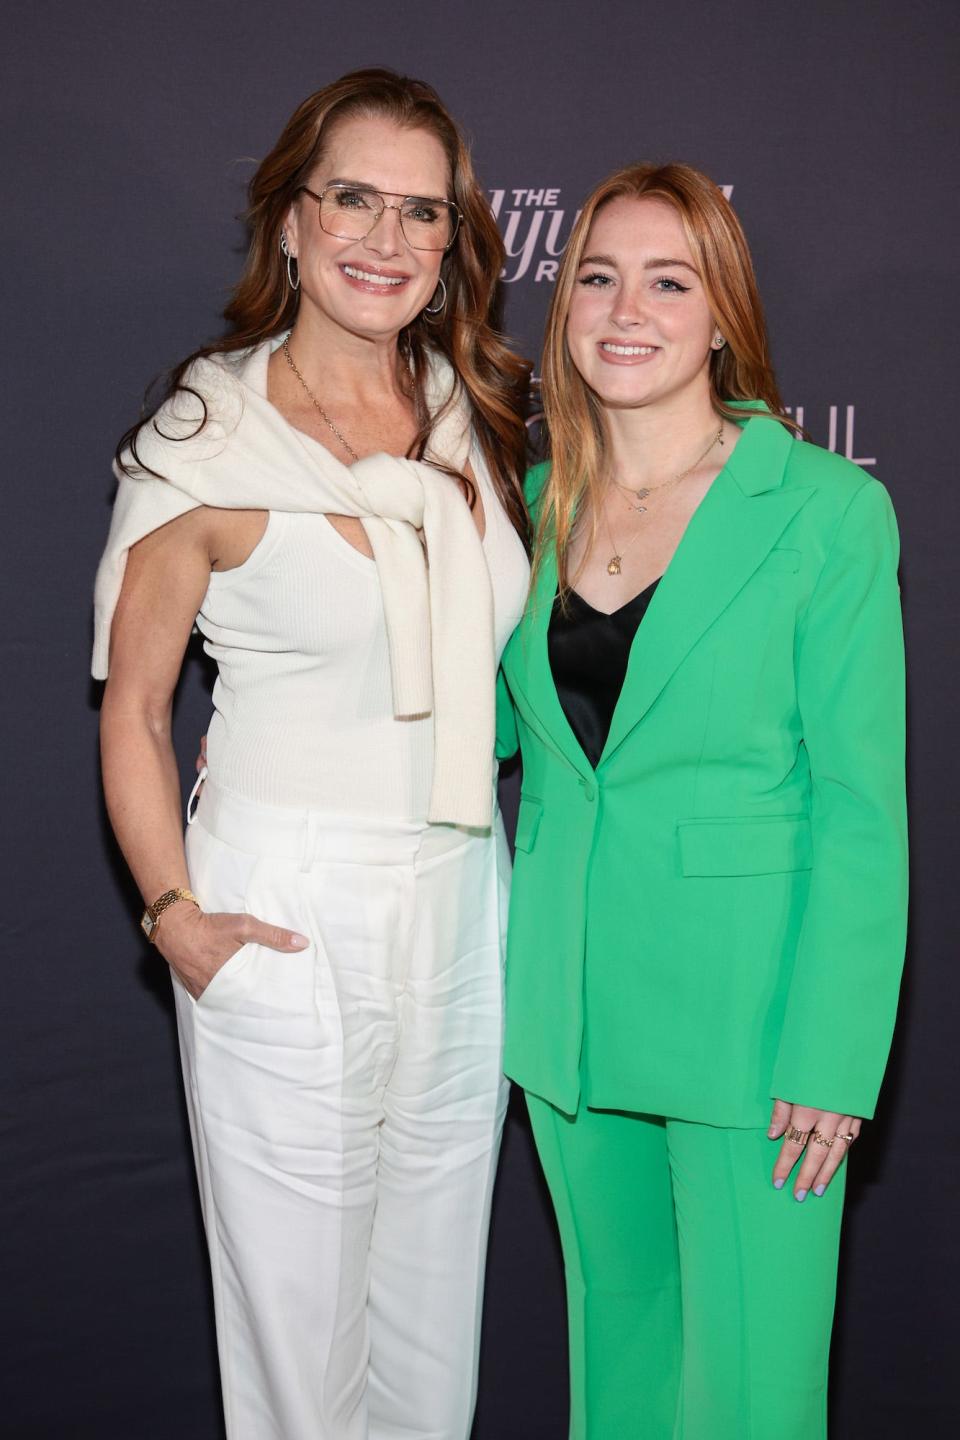 Brookie Shields and her daughter Rowan Henchy at a Hollywood Reporter event on May 17, 2022.